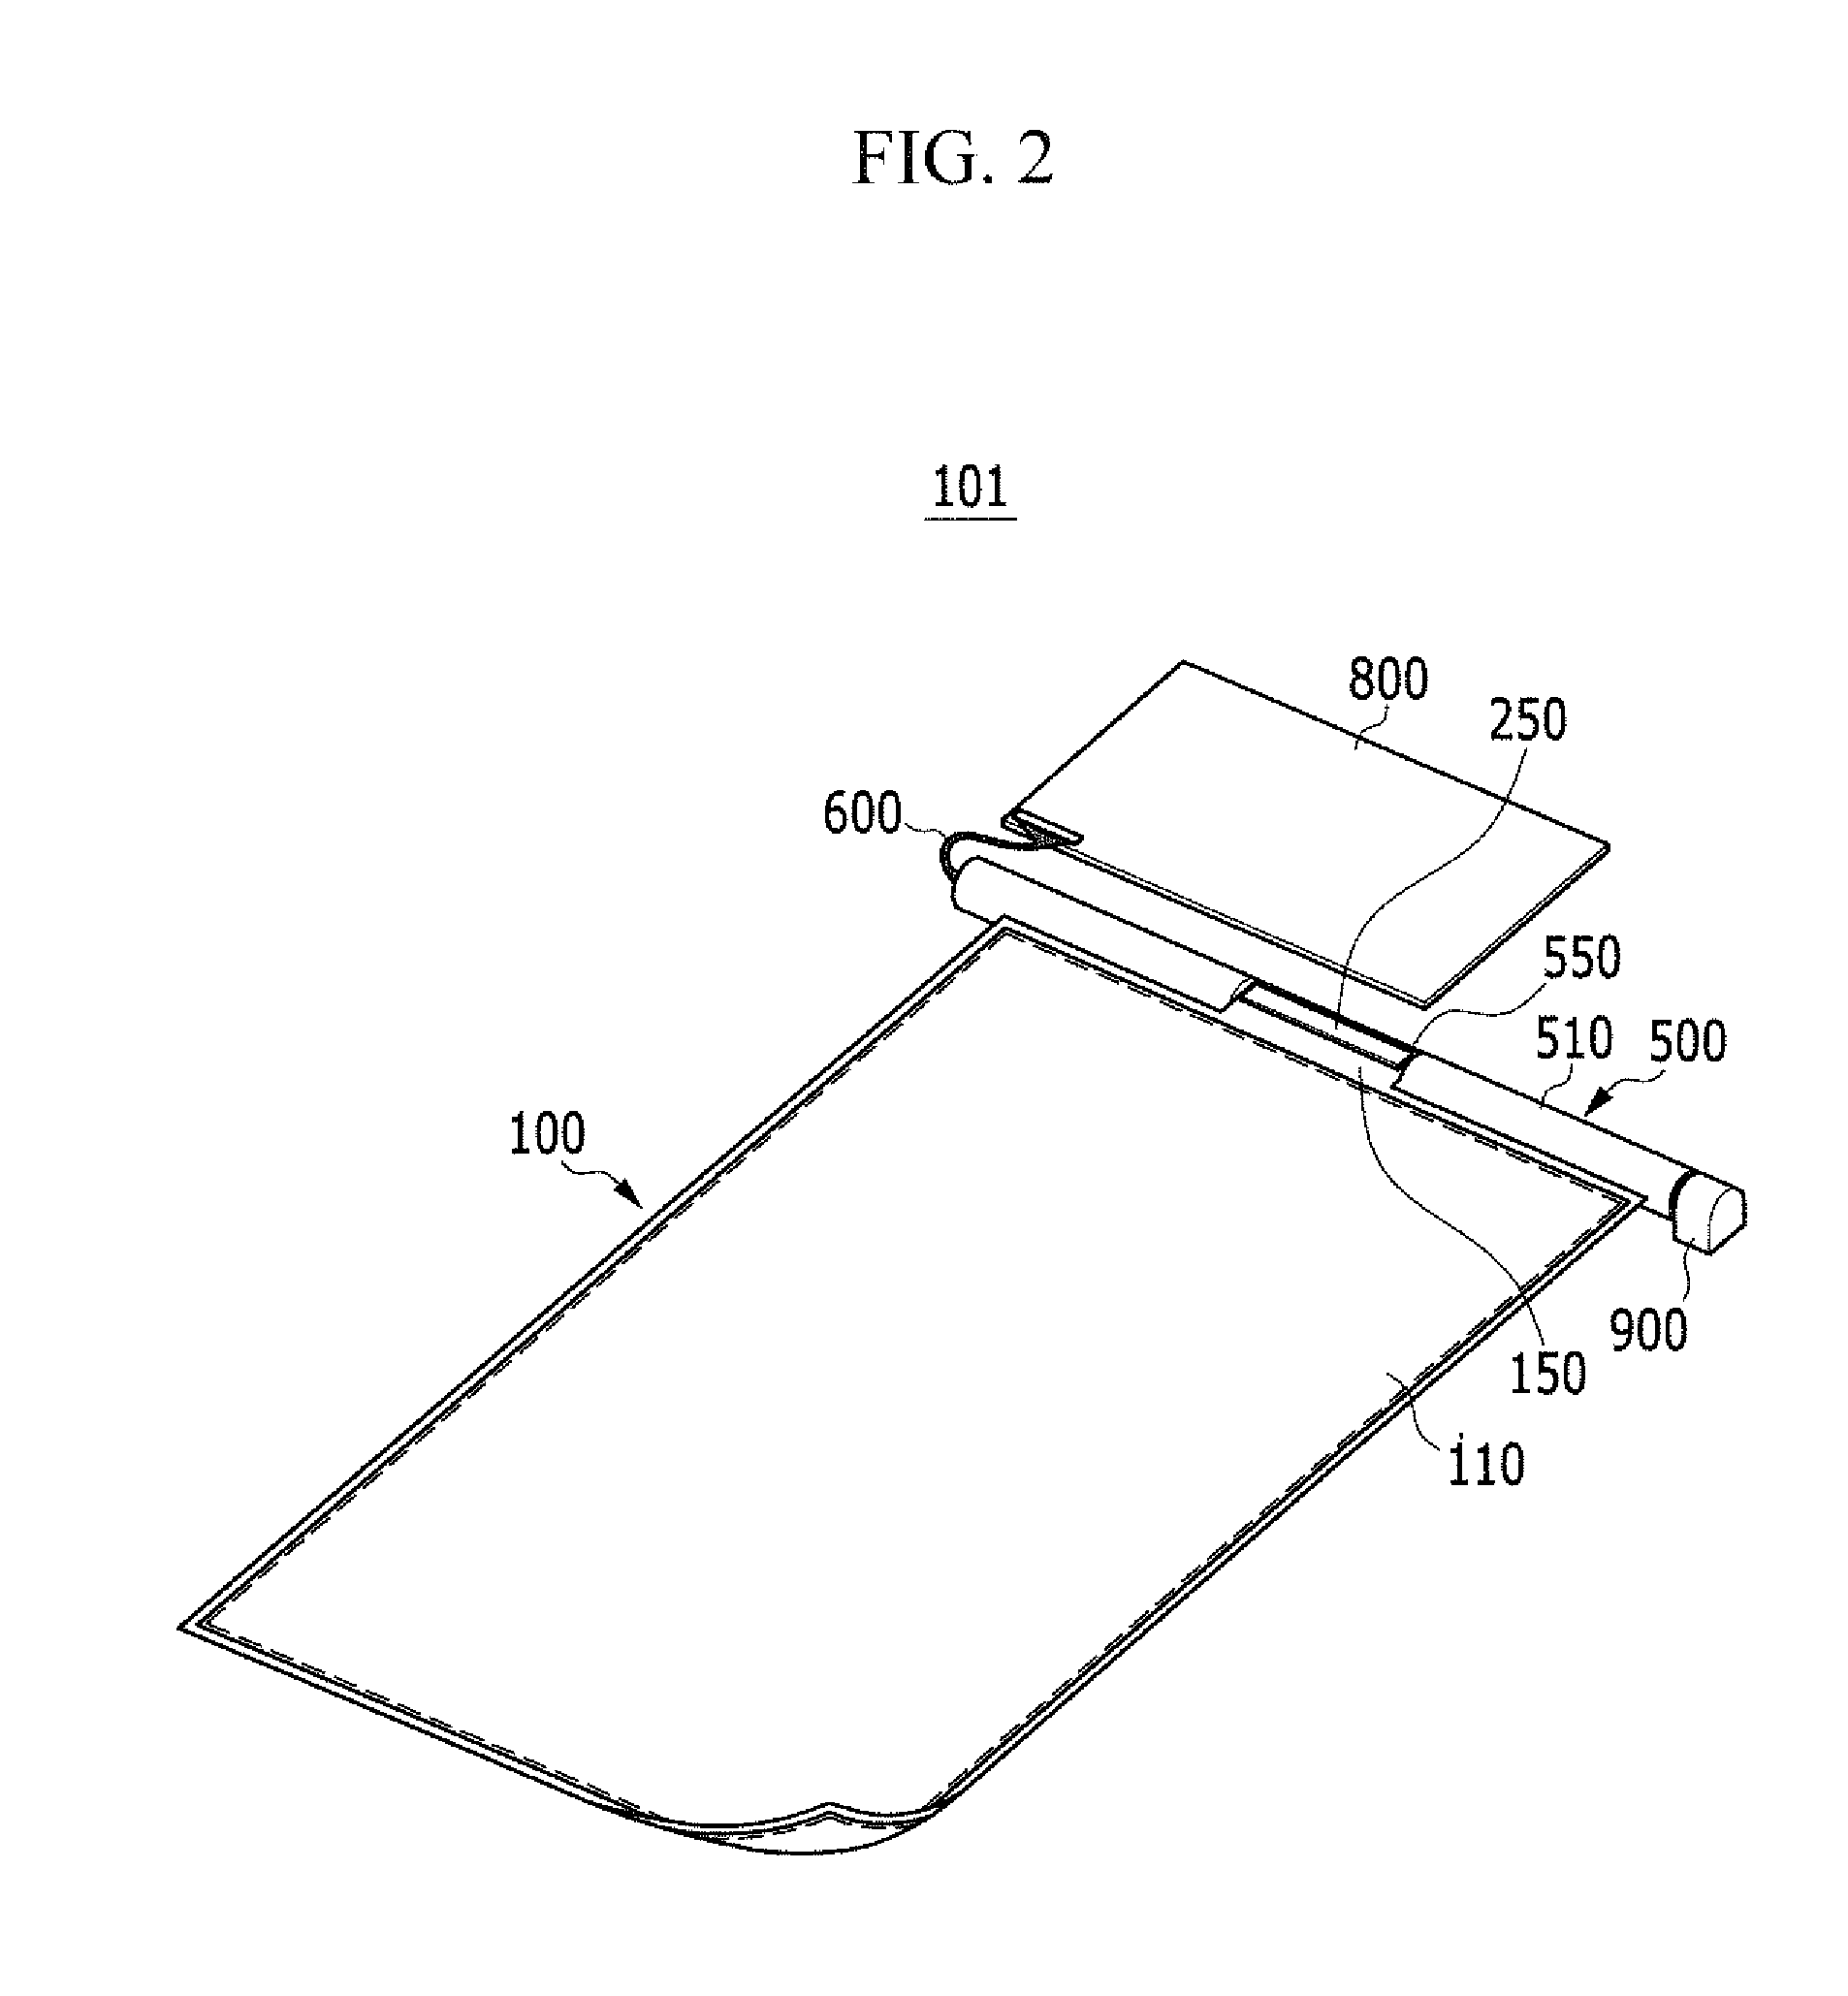 Display Device Having a Rollable Display Unit